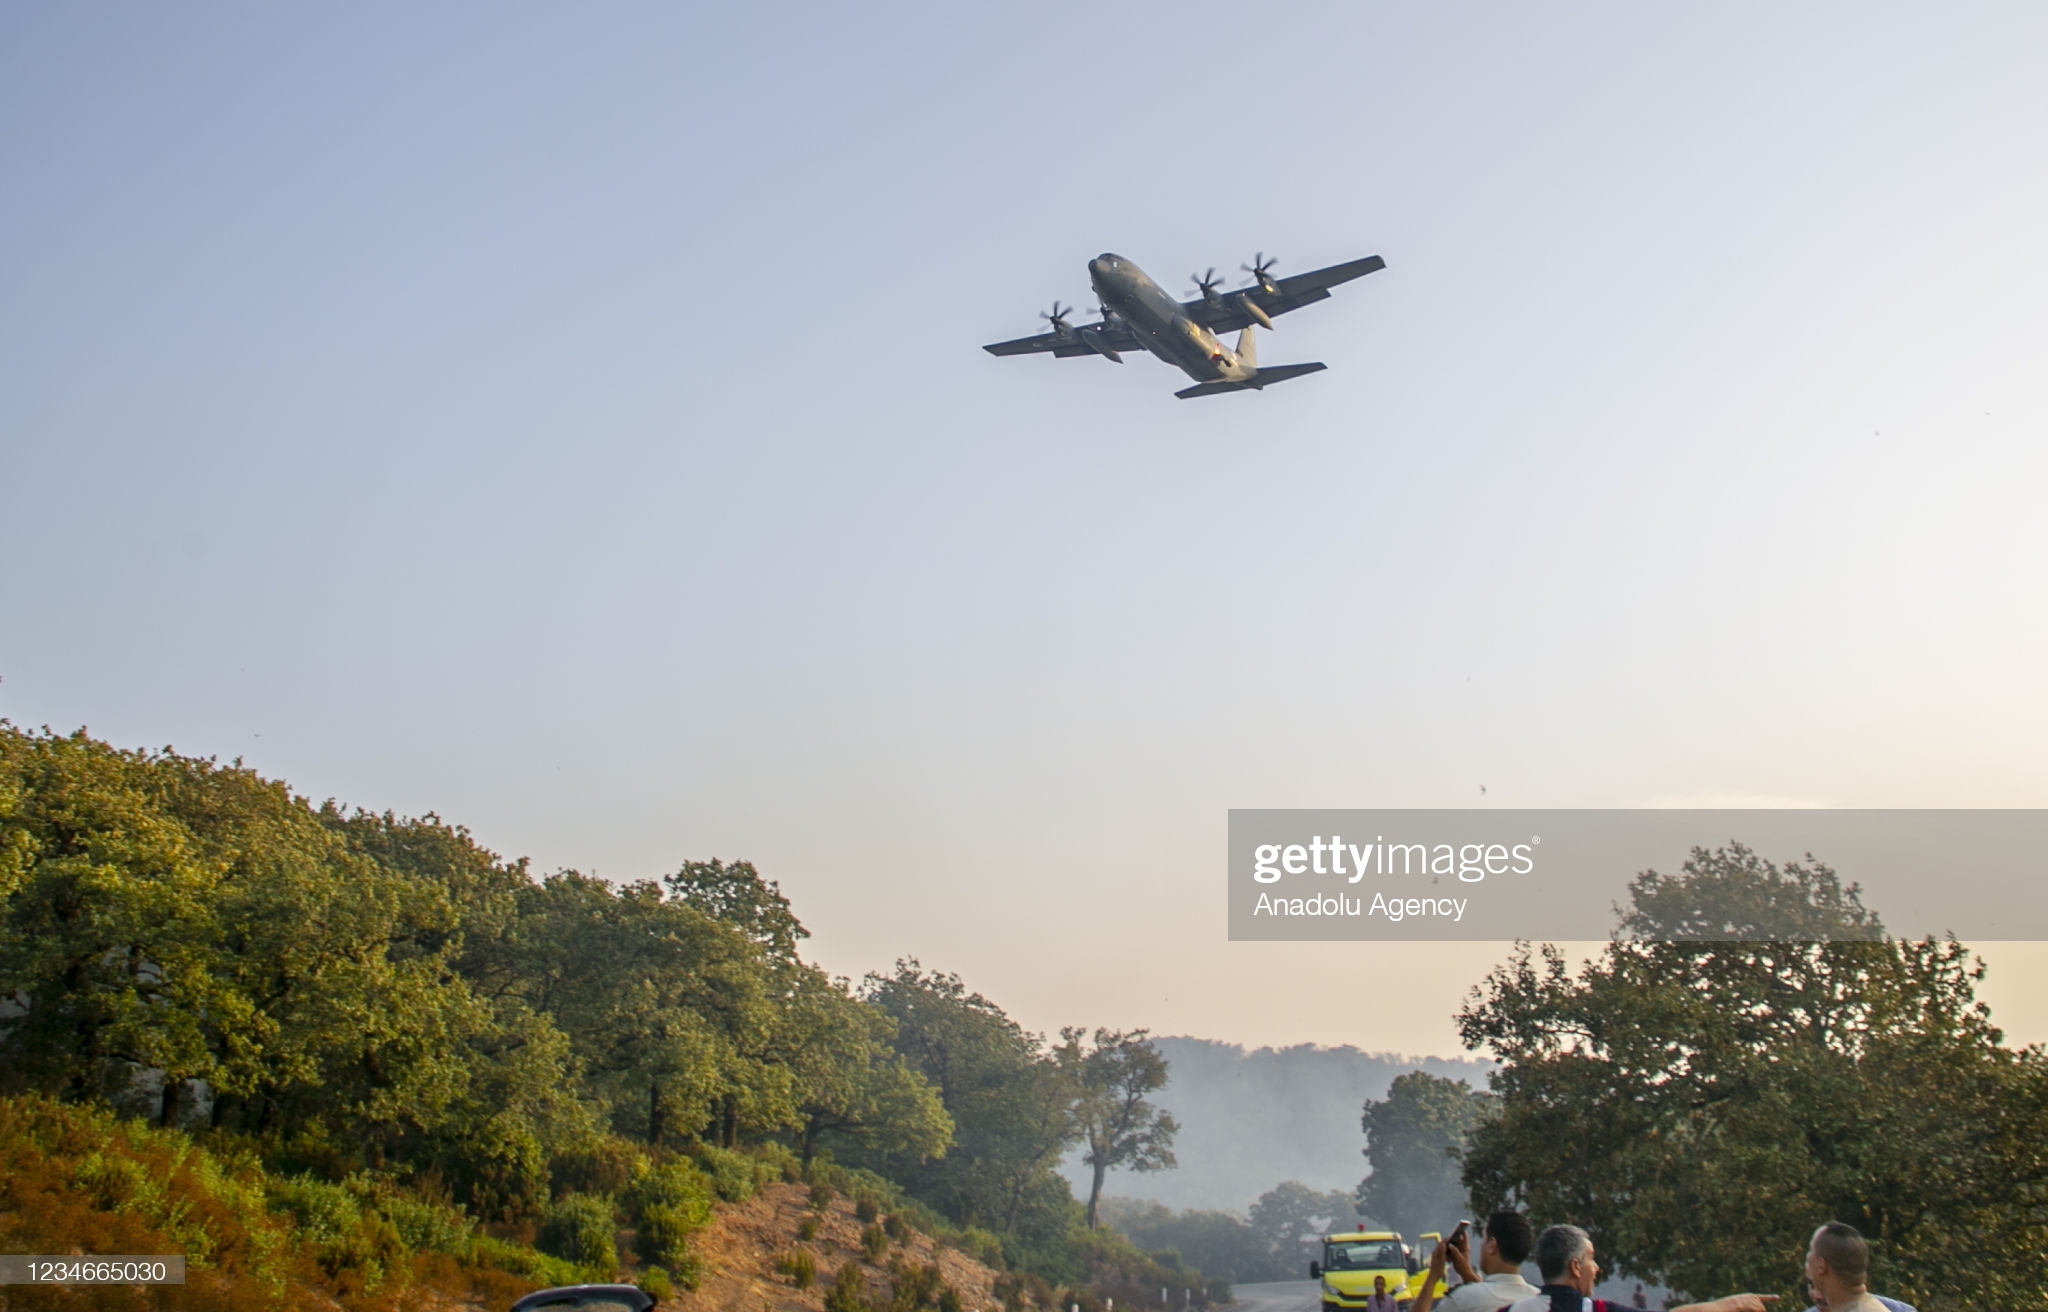 gettyimages-1234665030-2048x2048.jpg